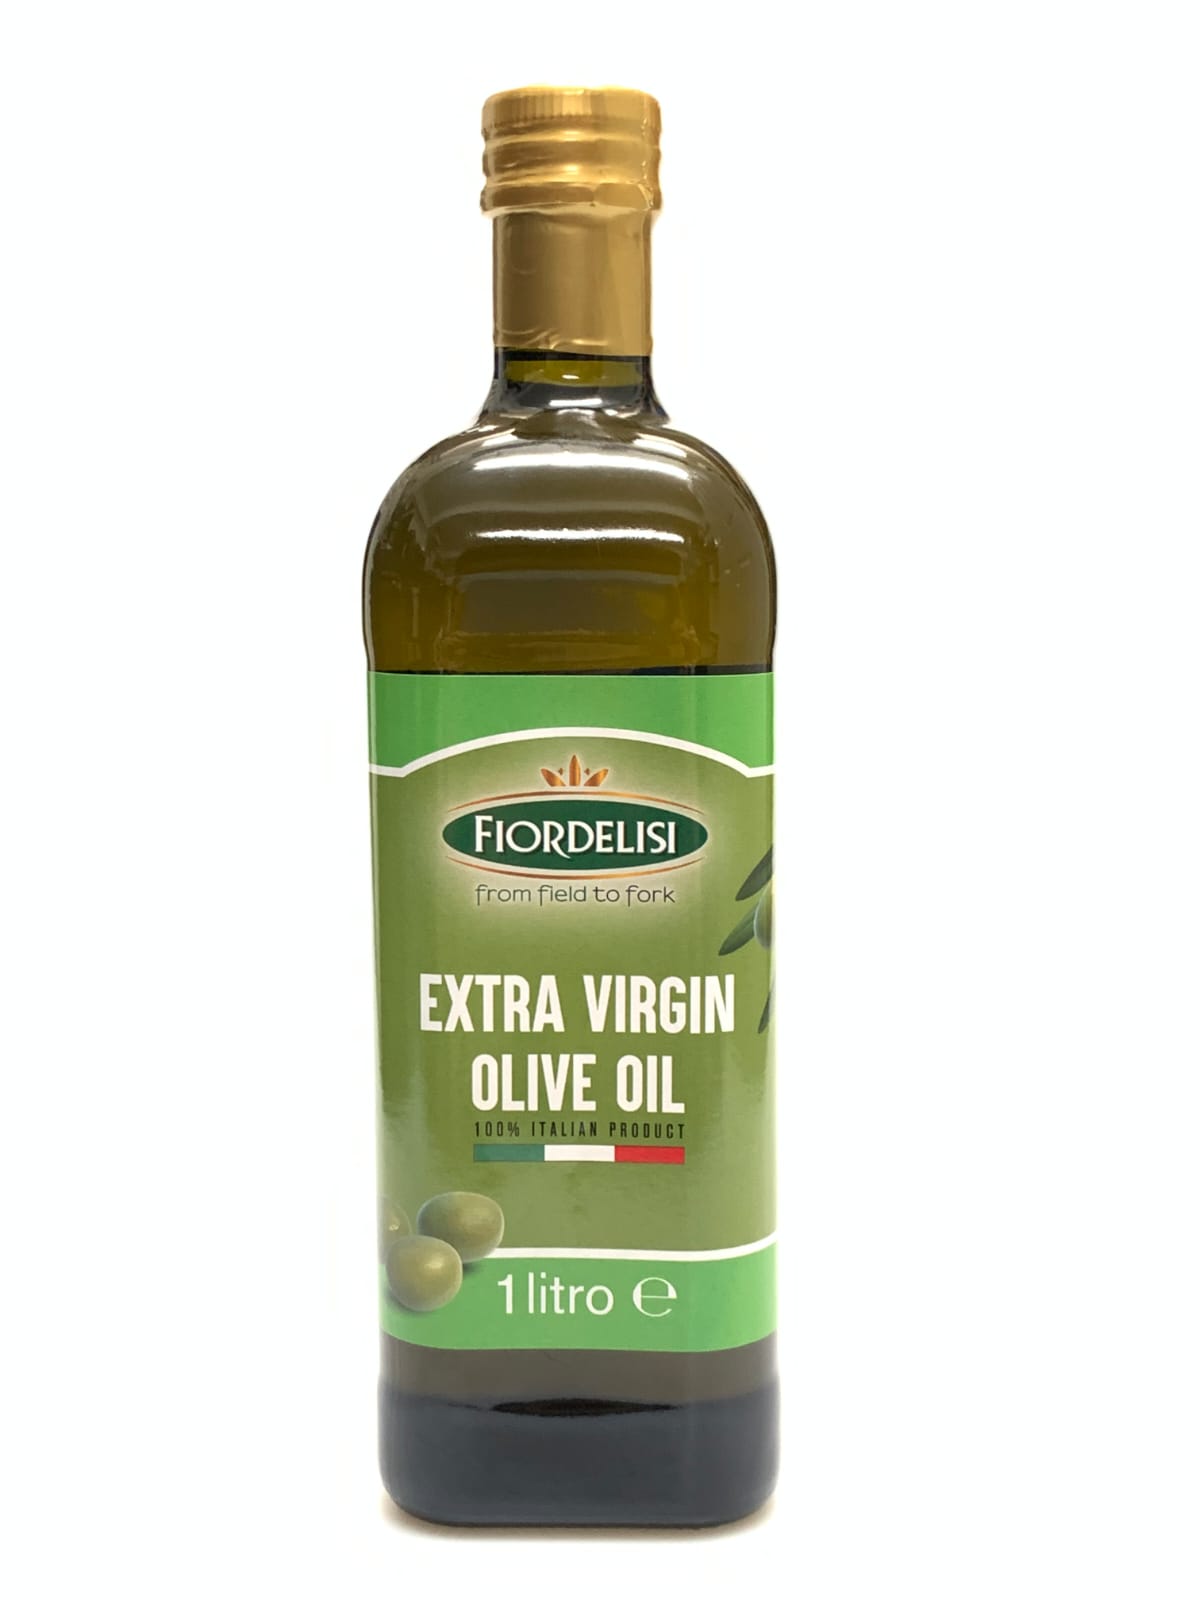 EXTRA VIRGIN OLIVE OIL FIORDELISI - 1 Lt - Jet Italian Deli - Jet Italian Deli - Italian food - Italian grocery - Food delivery - Thailand - Wine - Truffle - Pasta - Cheese